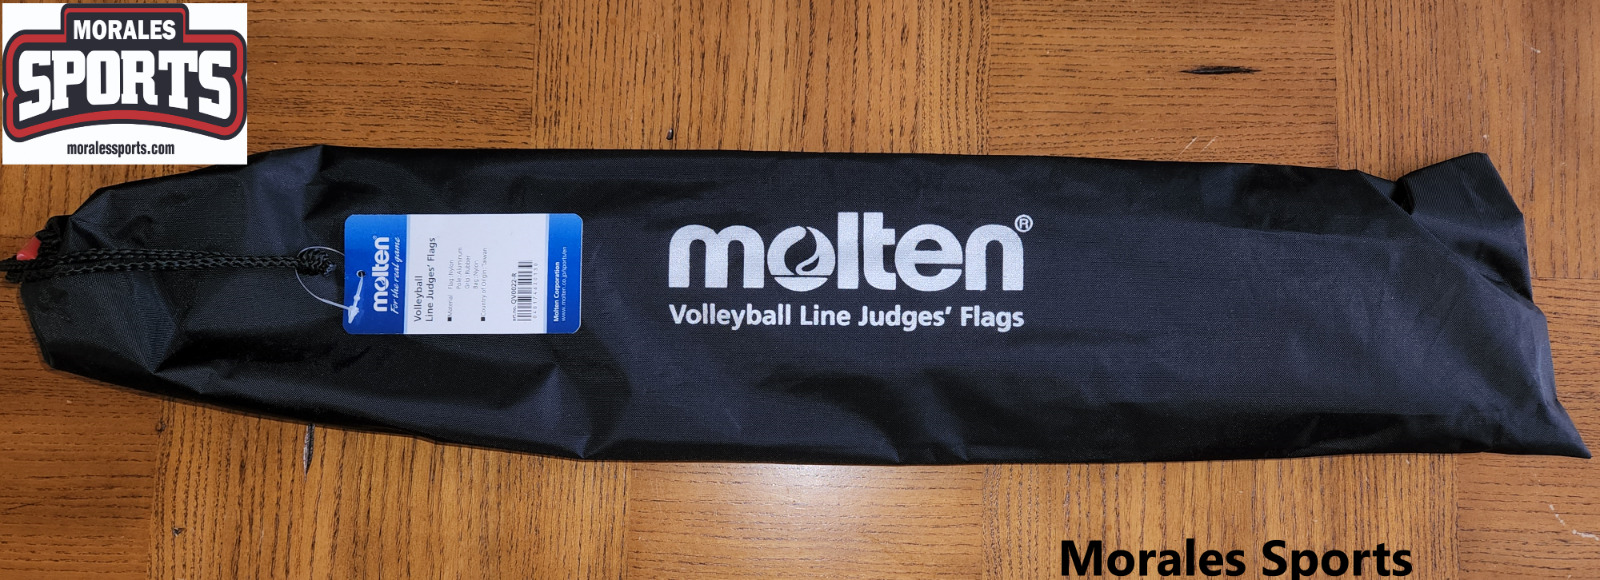 Molten Qv0022-r Volleyball Linesman's Flags Set Of 2 Red Flags - * Us Seller *